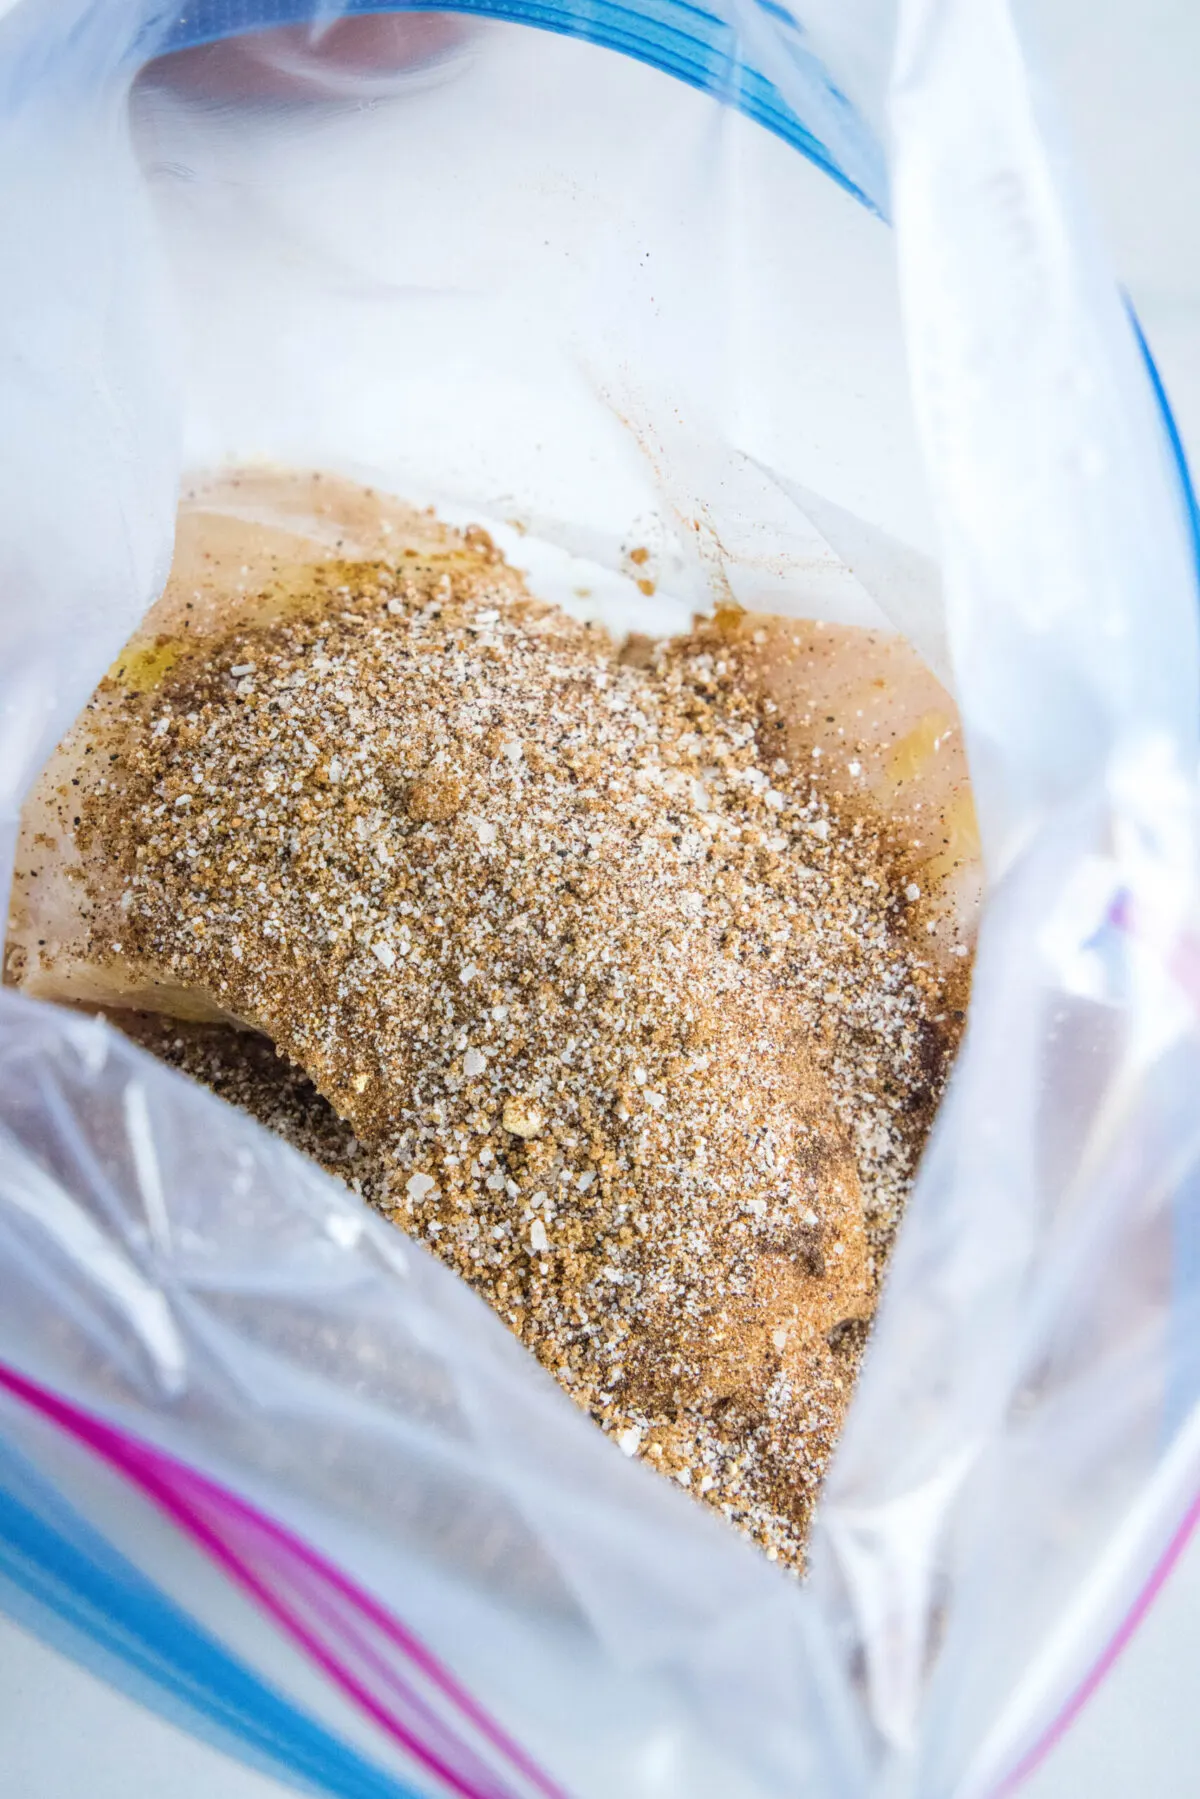 Raw chicken breasts and spice rub in a plastic bag